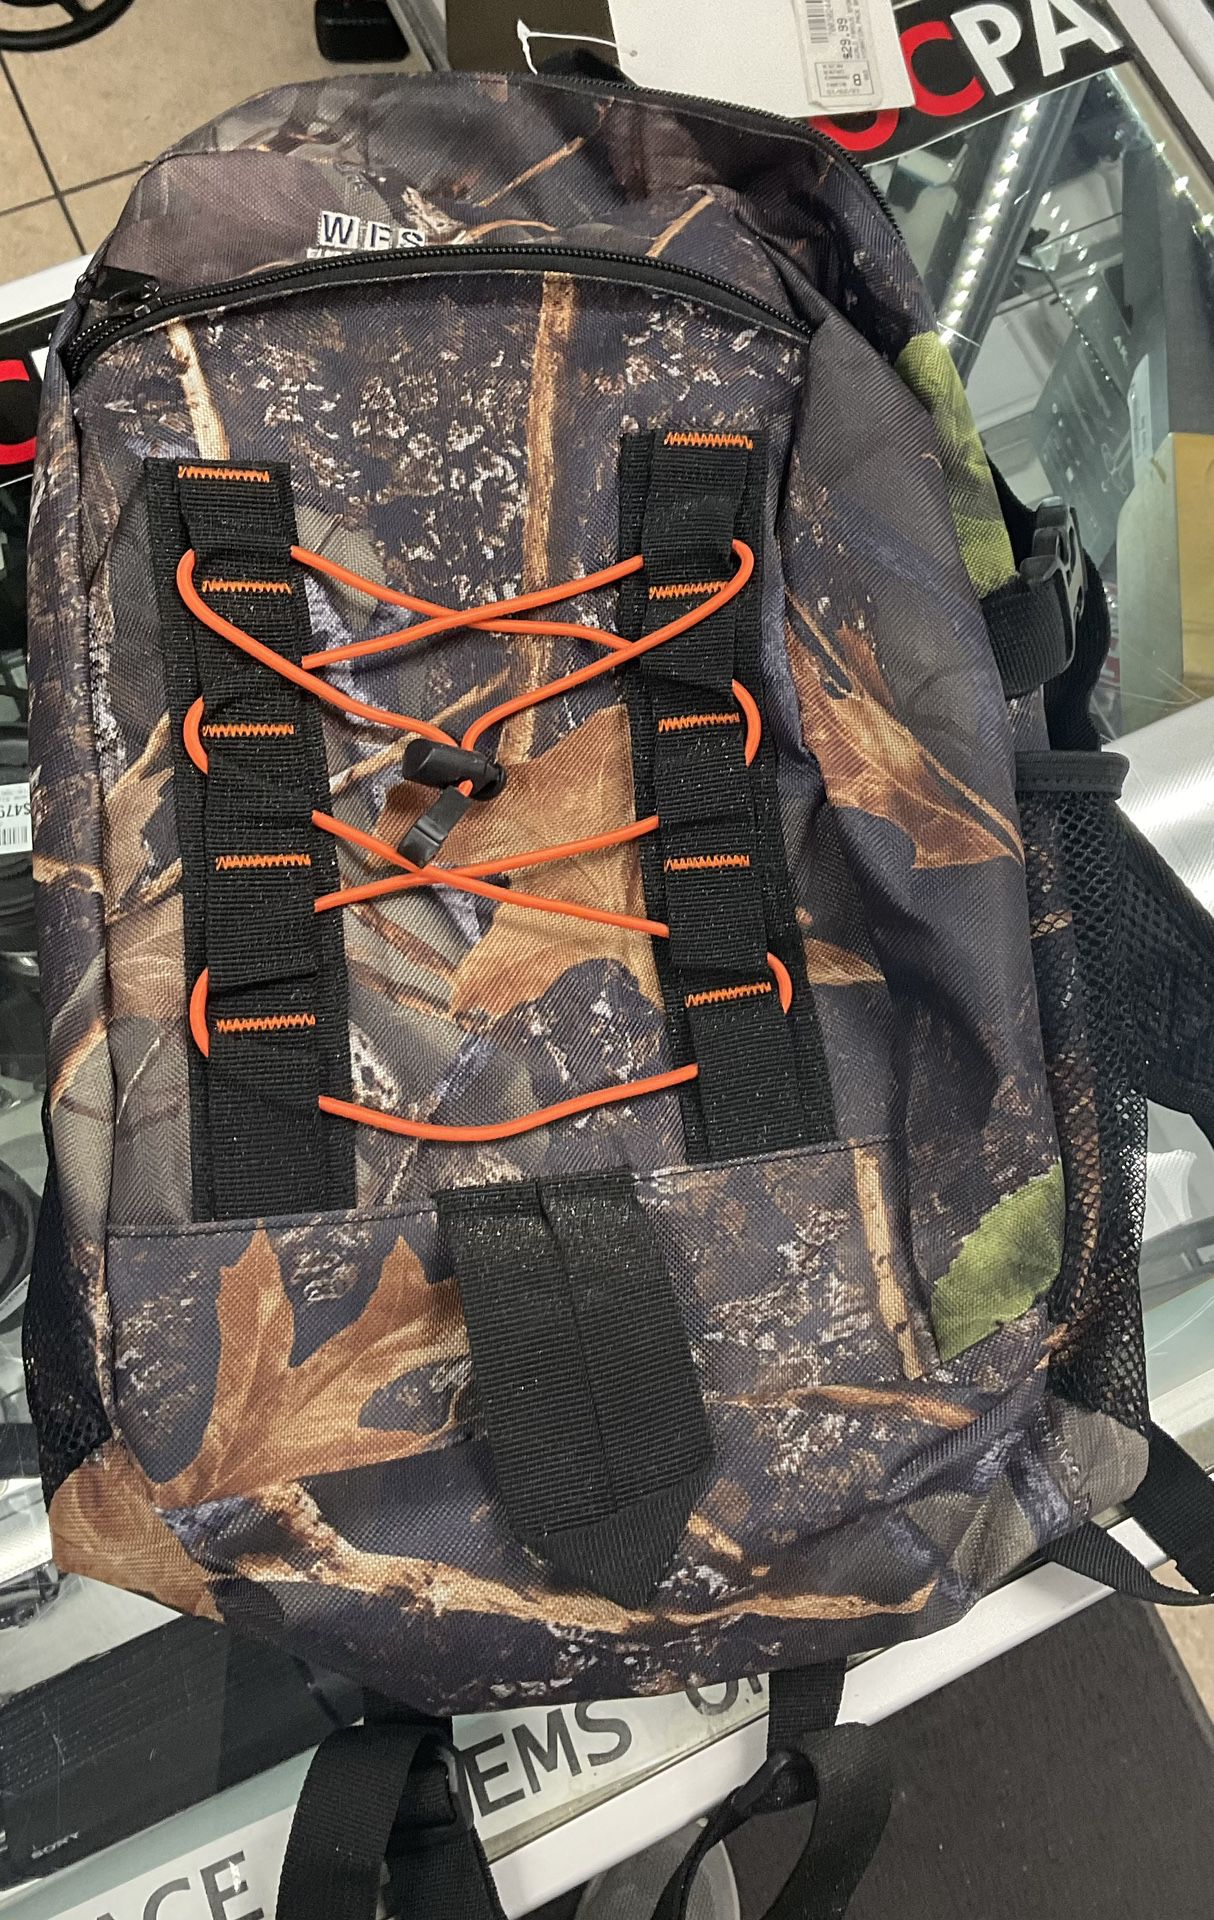 Hydration Backpack/2 Liter (mint Condition)